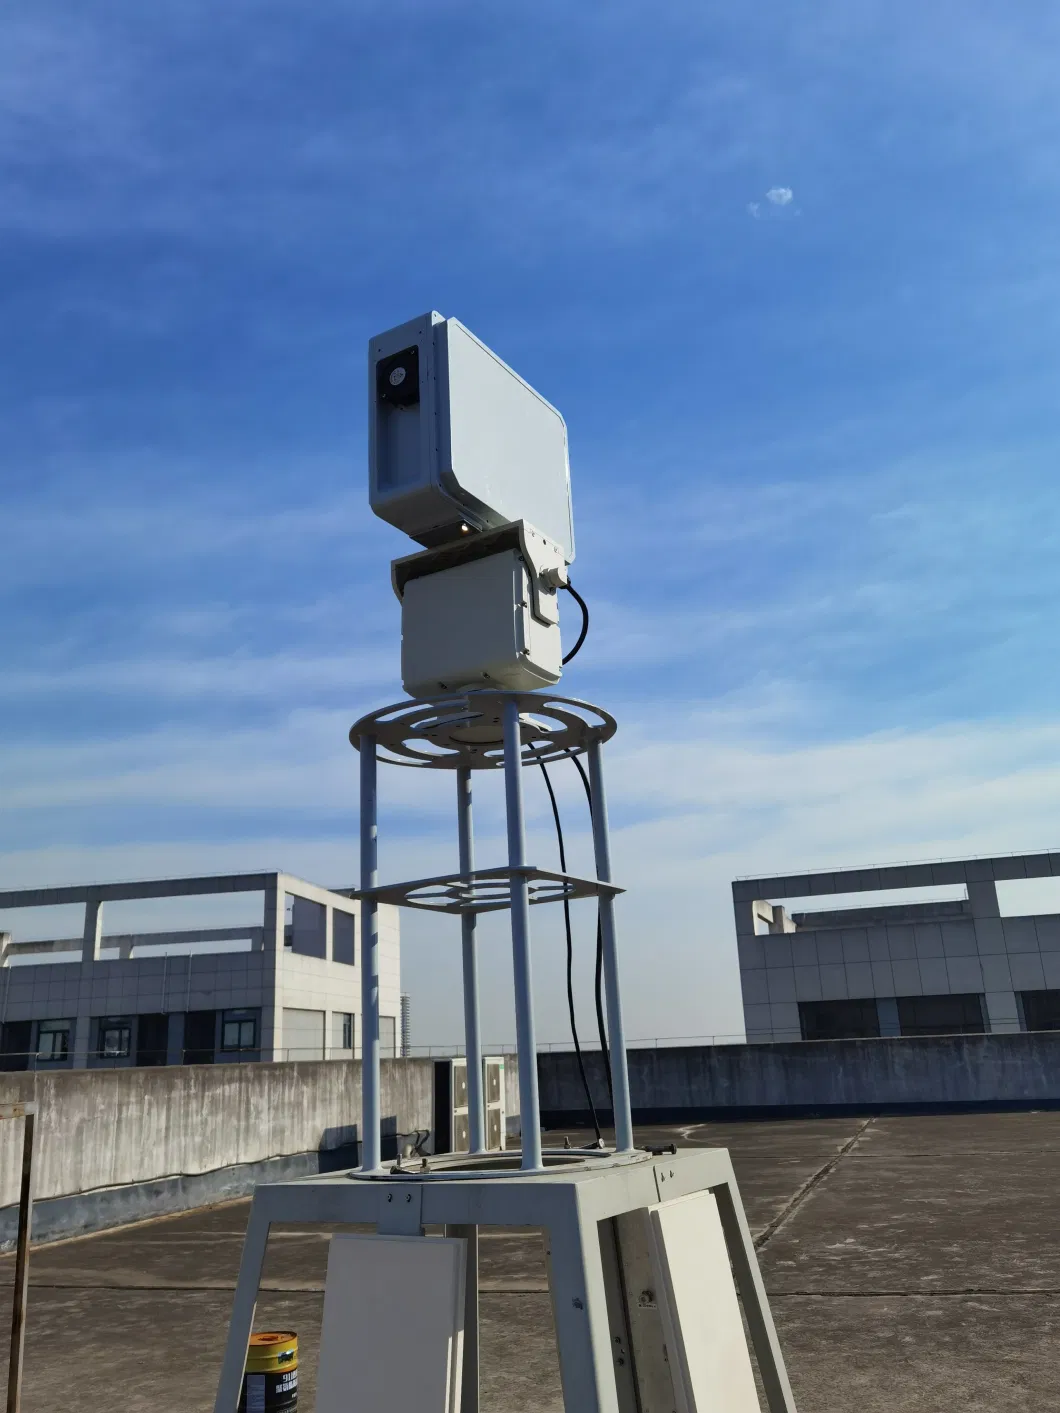 Passive Electronically Scanned Array Radar for Surveillance Security Perimeter Alarming